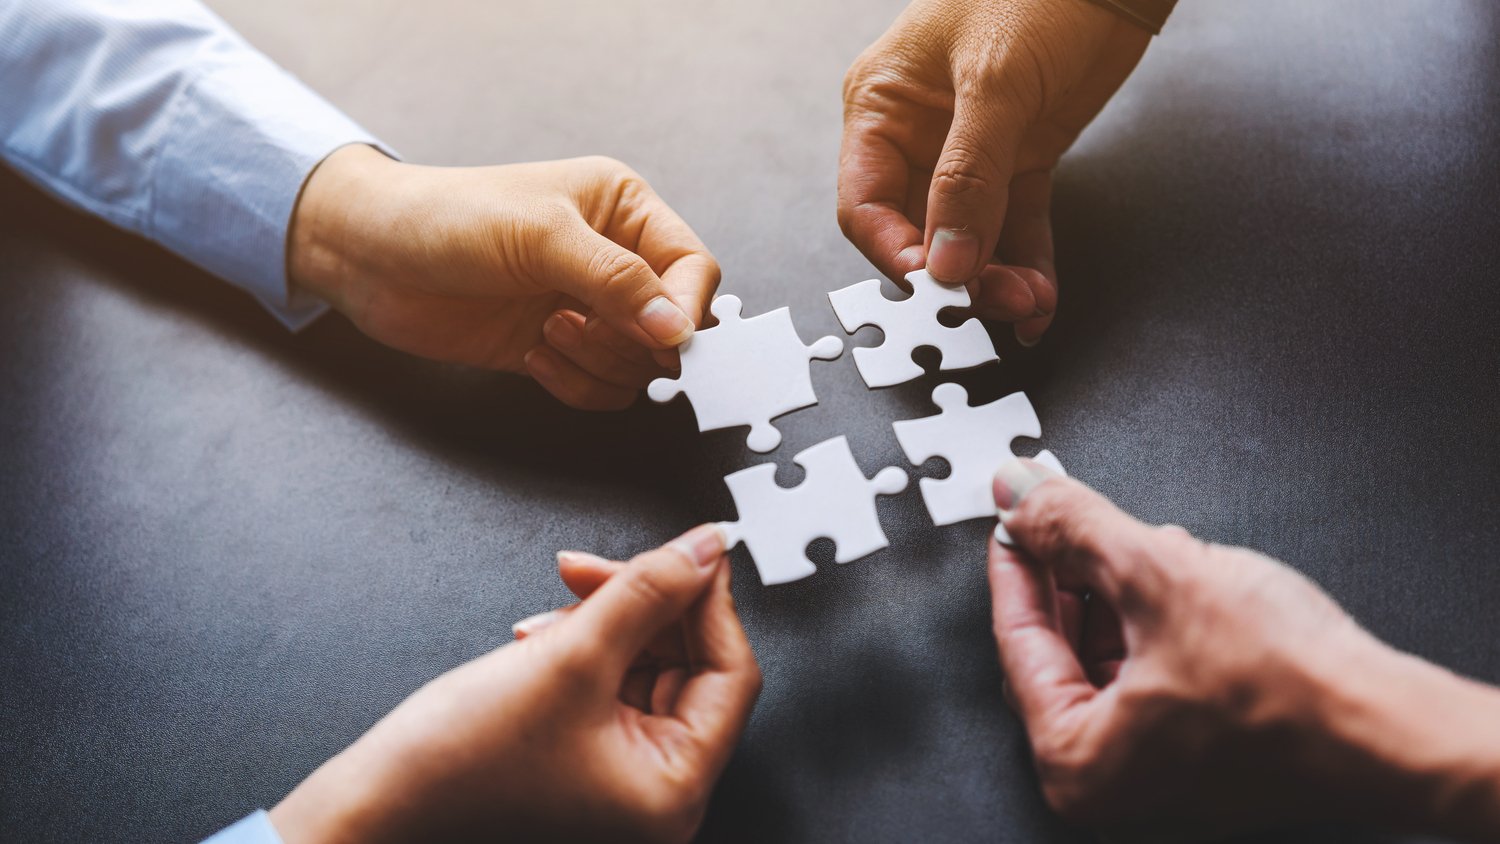 close-up-four-hands-holding-pieces-white-jigsaw-puzzle-joint-path-problem-solution-find-way-out-exit-difficult-situation-support-teamwork-concept